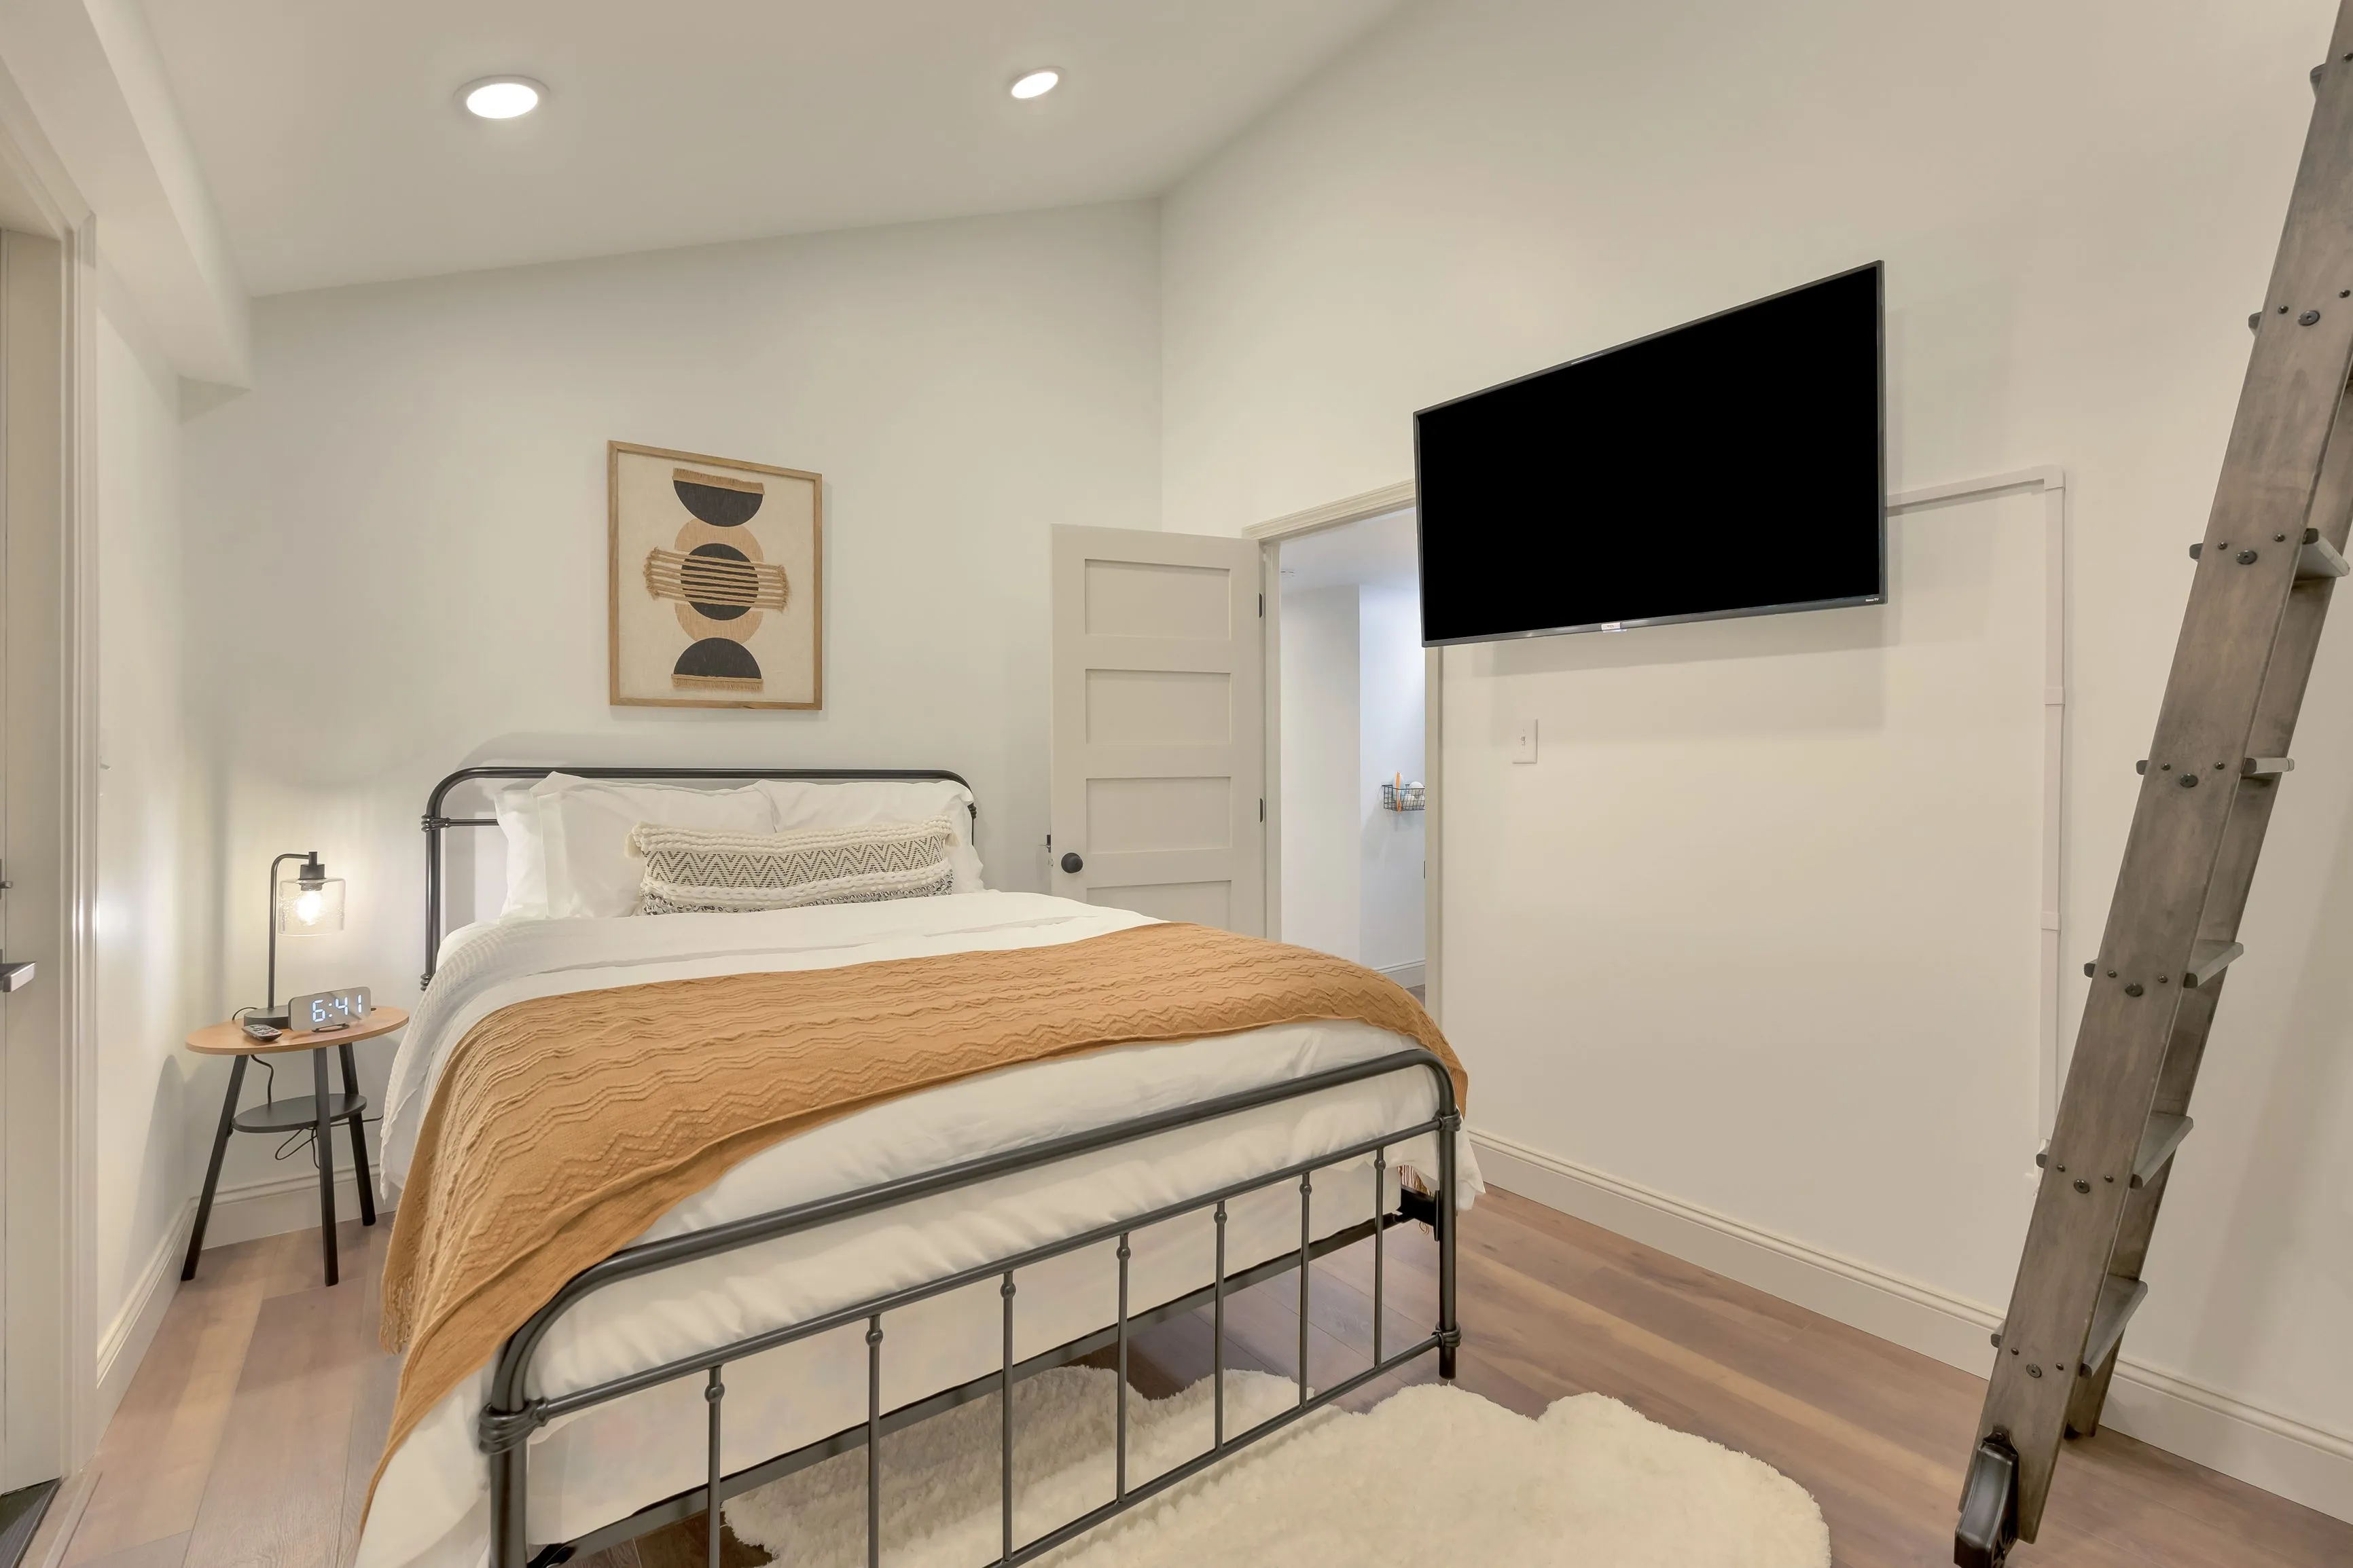 Modern bedroom interior with a metal frame bed, white and patterned bedding, a mounted flat-screen TV, and decorative artwork above the bed. A rustic wooden ladder rests against the wall on the right, with soft lighting and a neutral color palette.